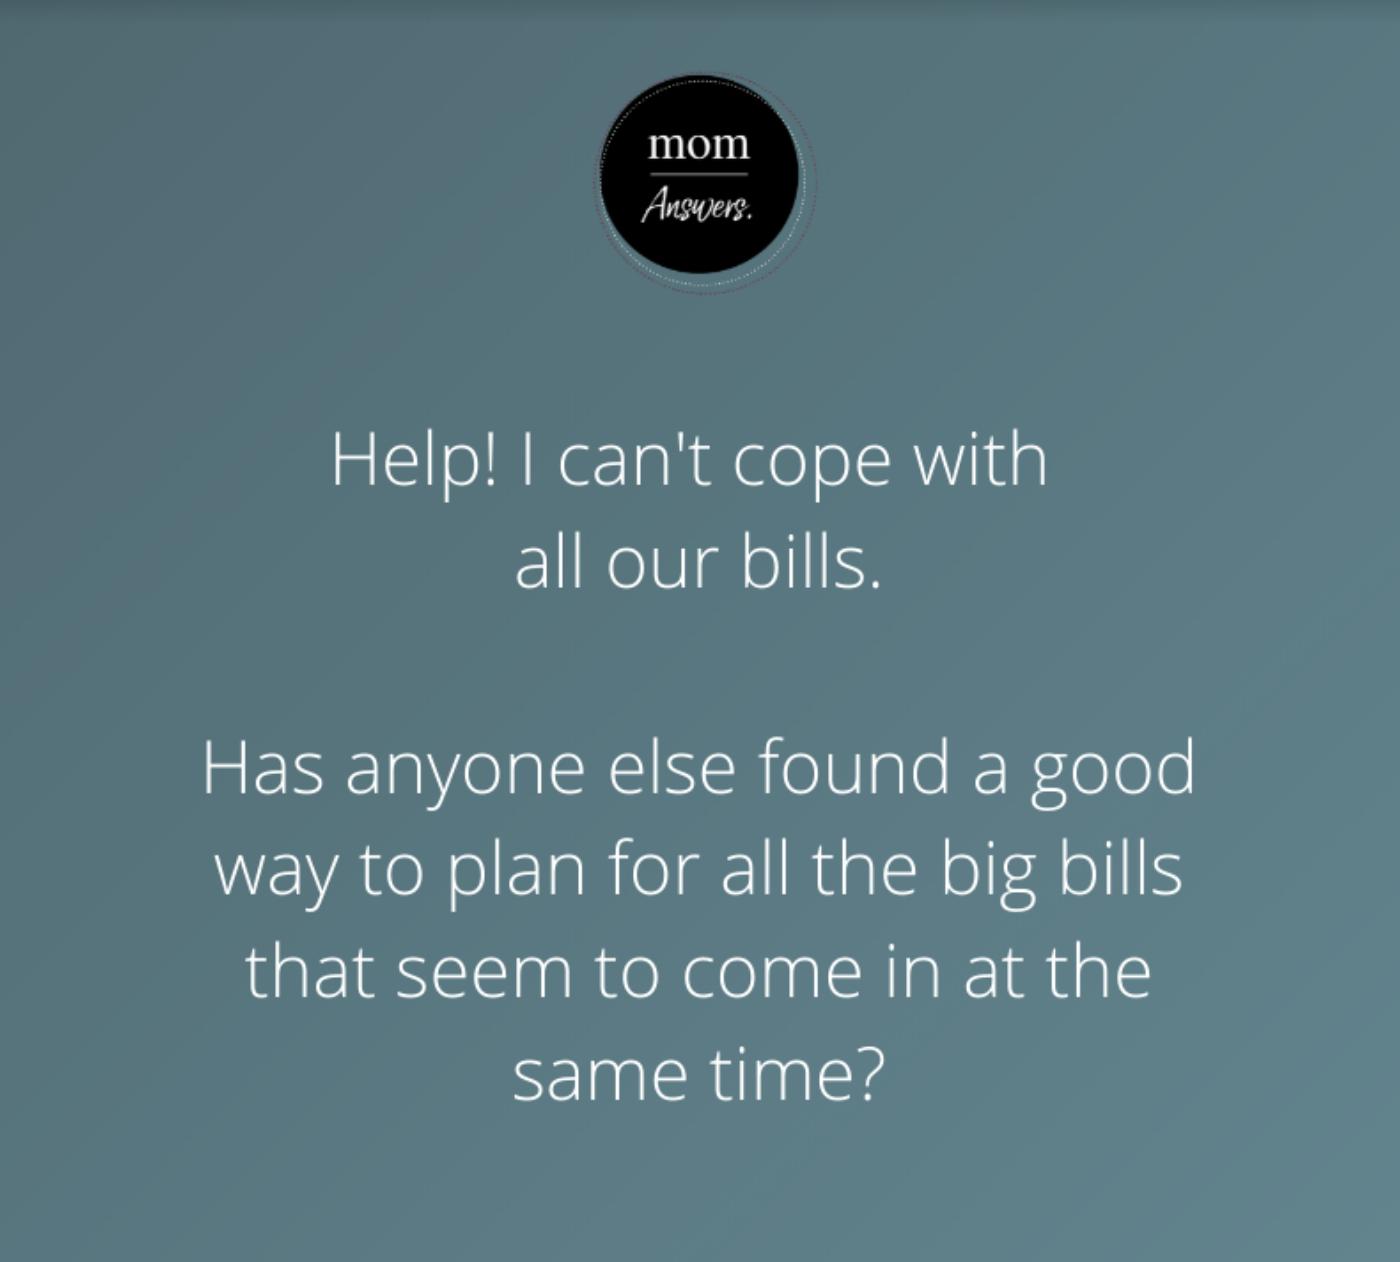 uno home loans mom answers - can't cope with bills